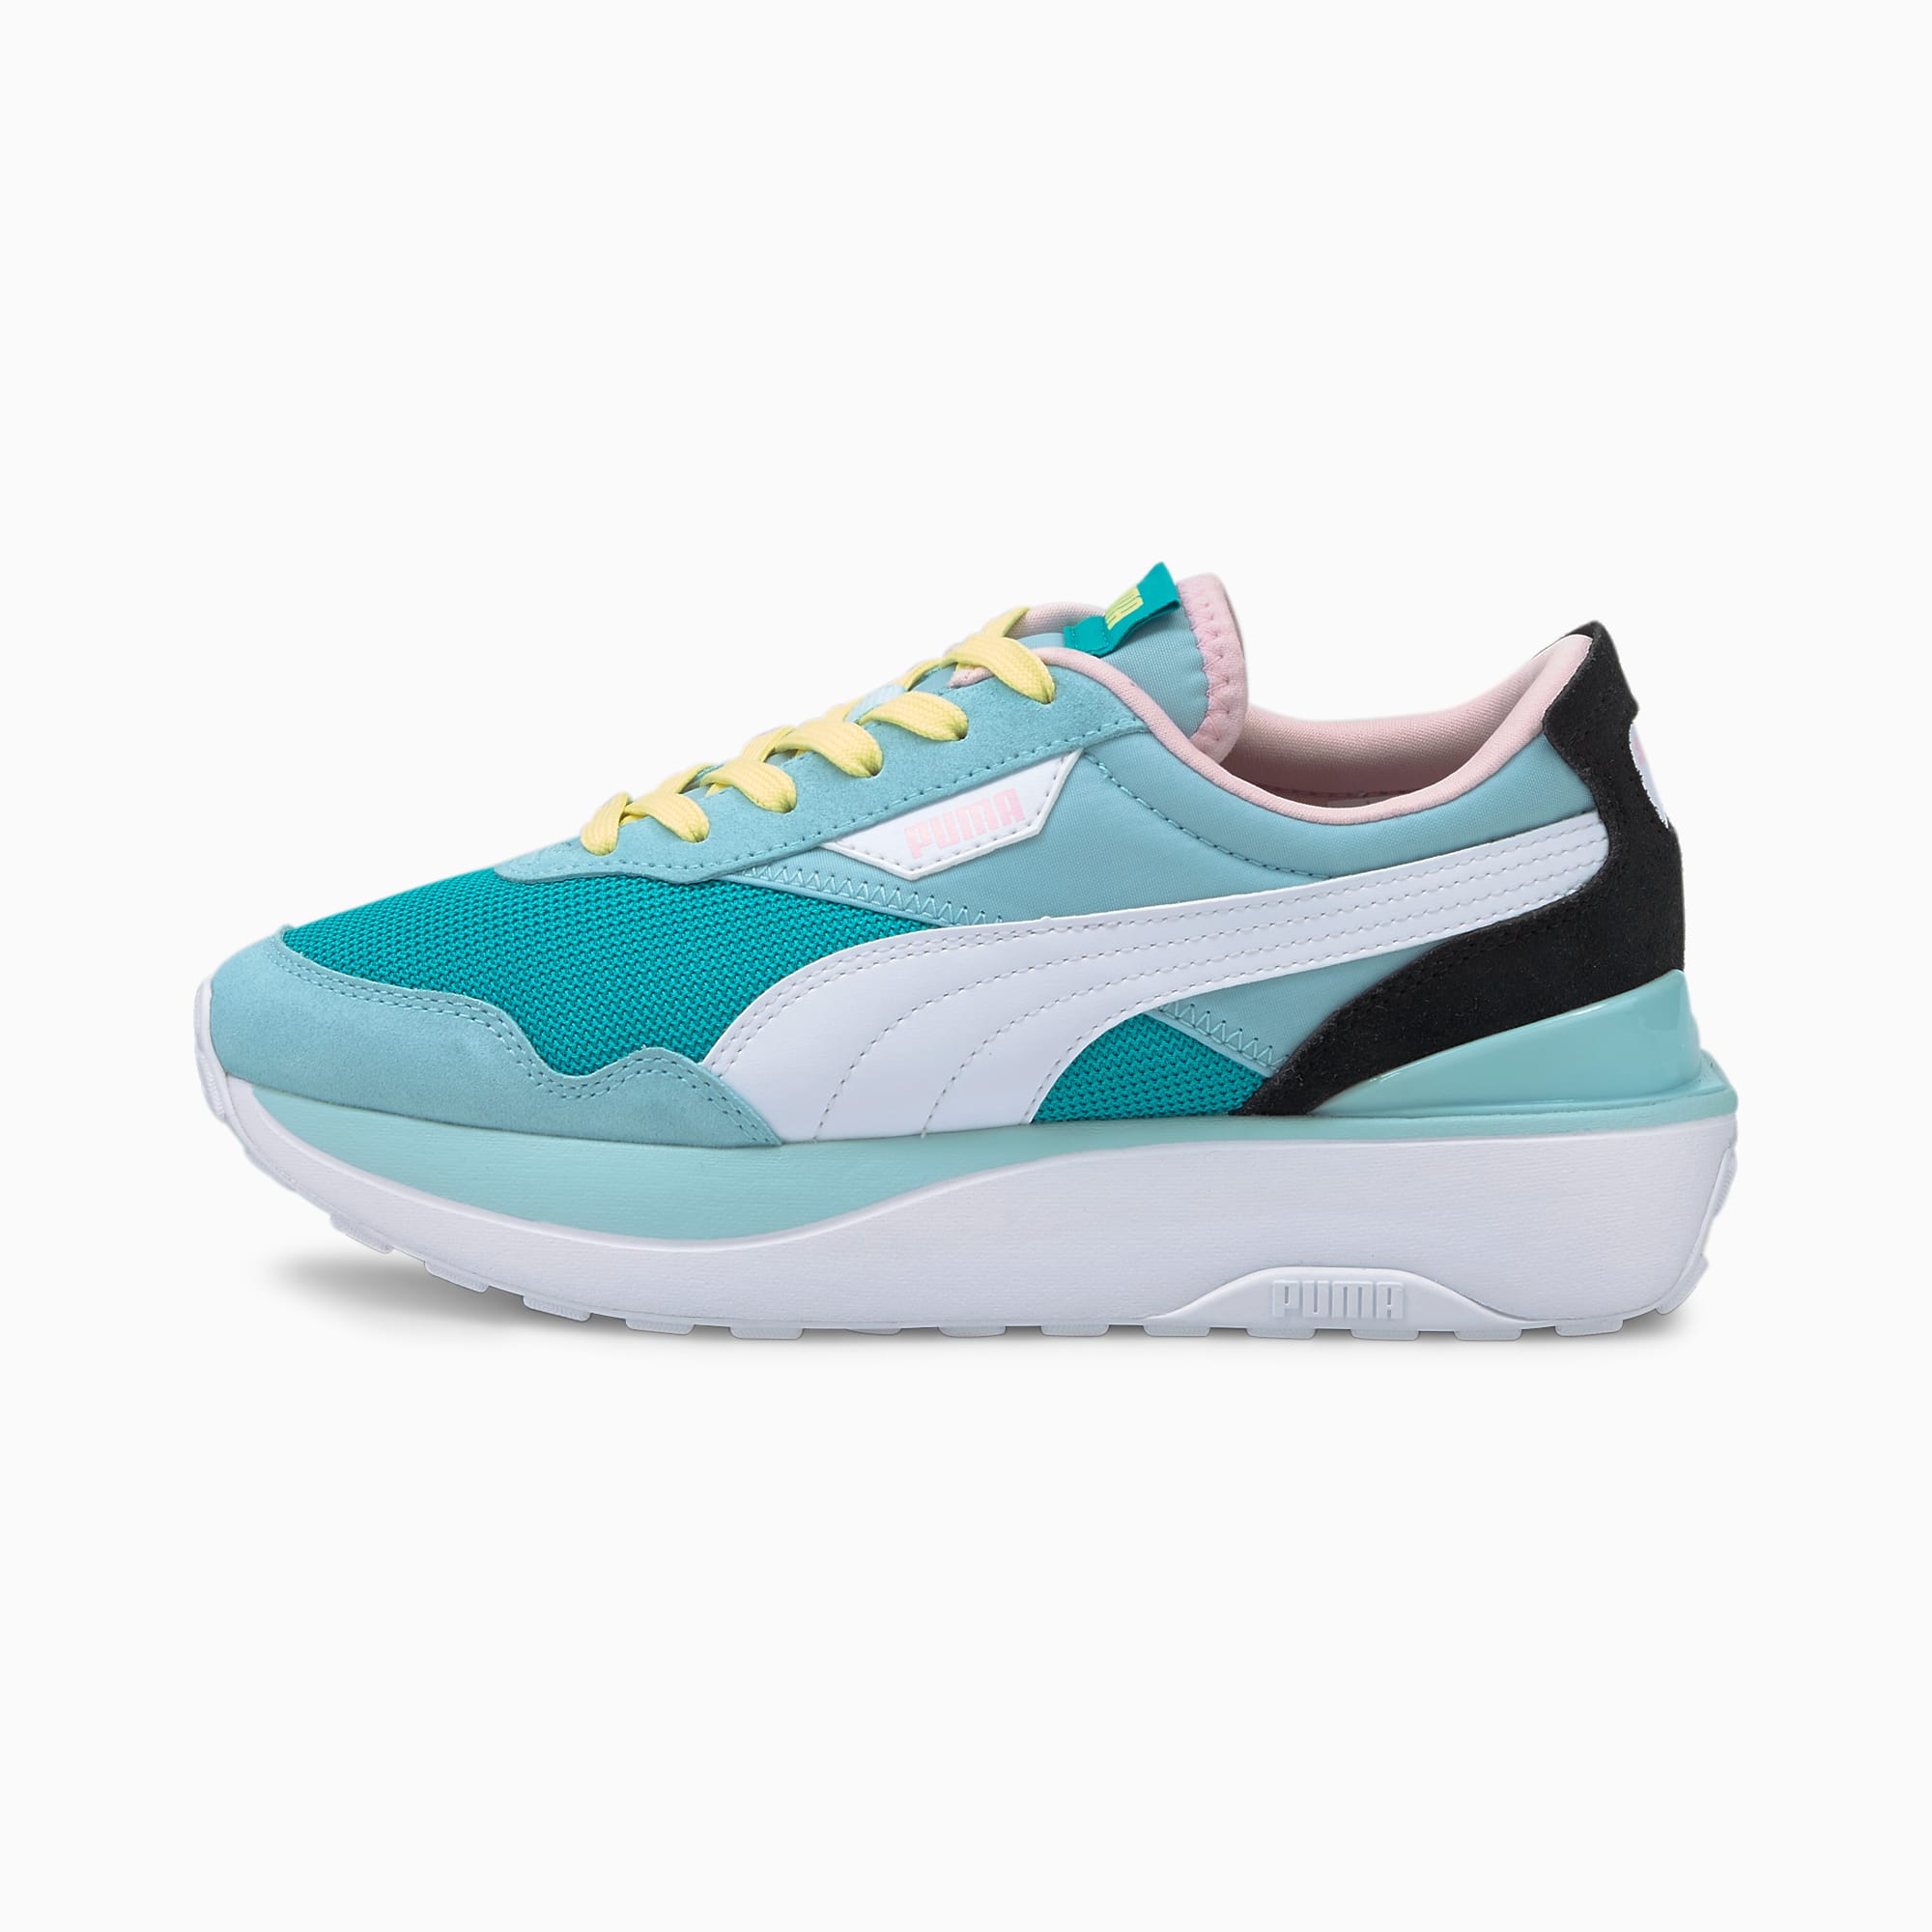 New Puma Shoes Womens Zappos | vlr.eng.br